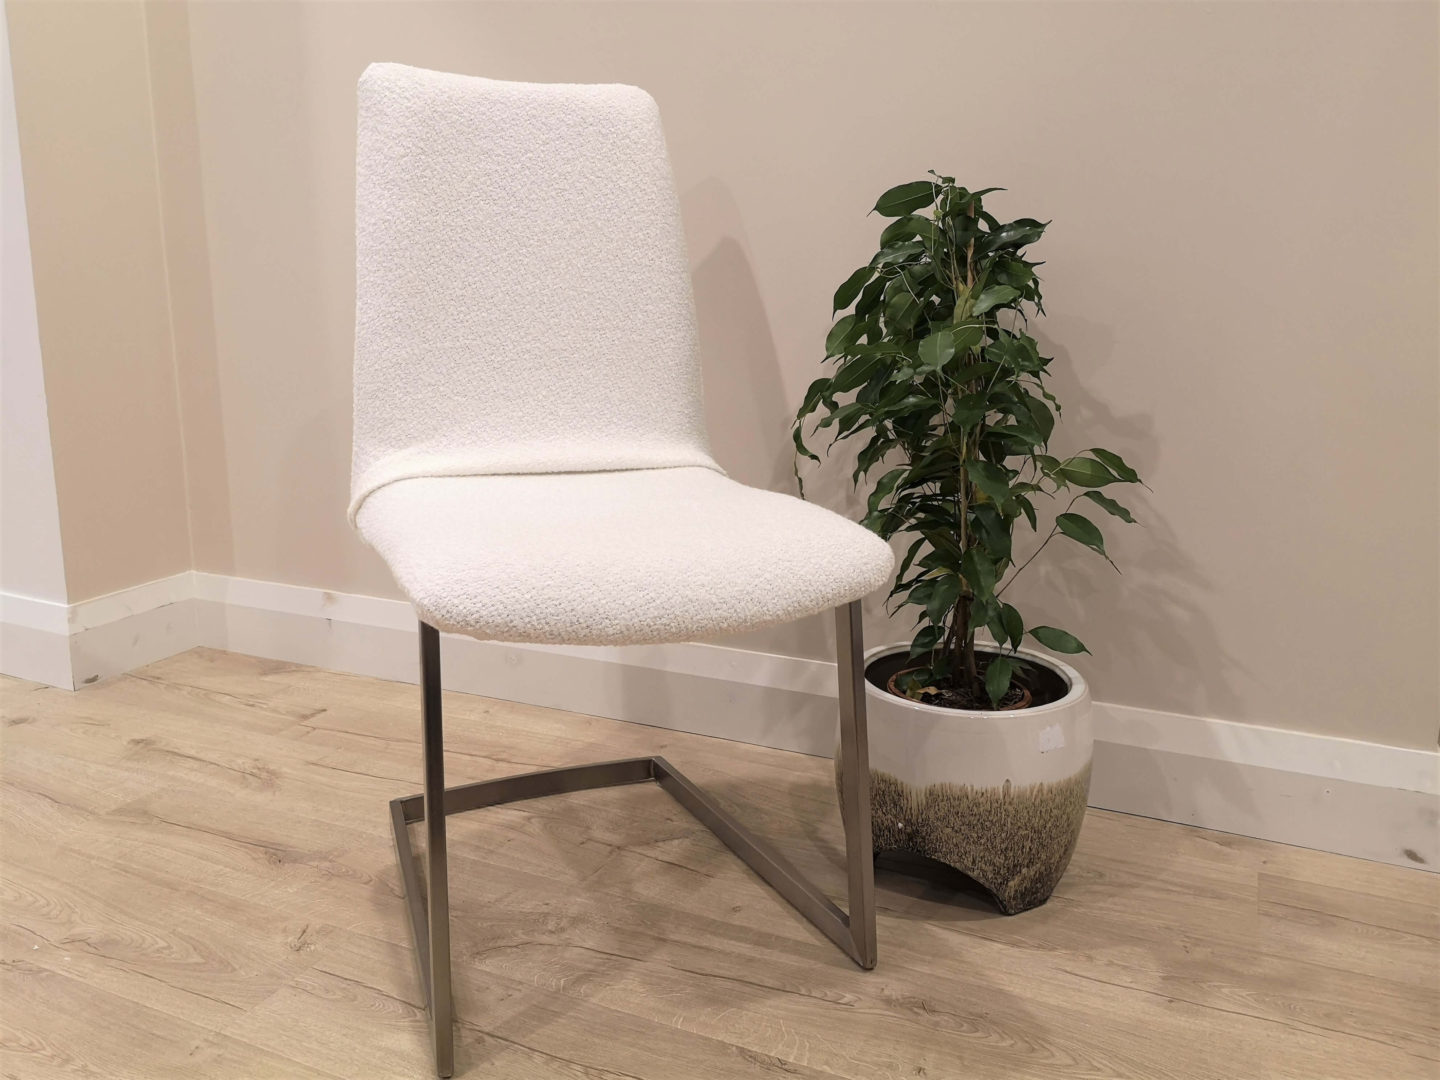 A dining chair with a white boucle material chair cover sitting next to a green plant.